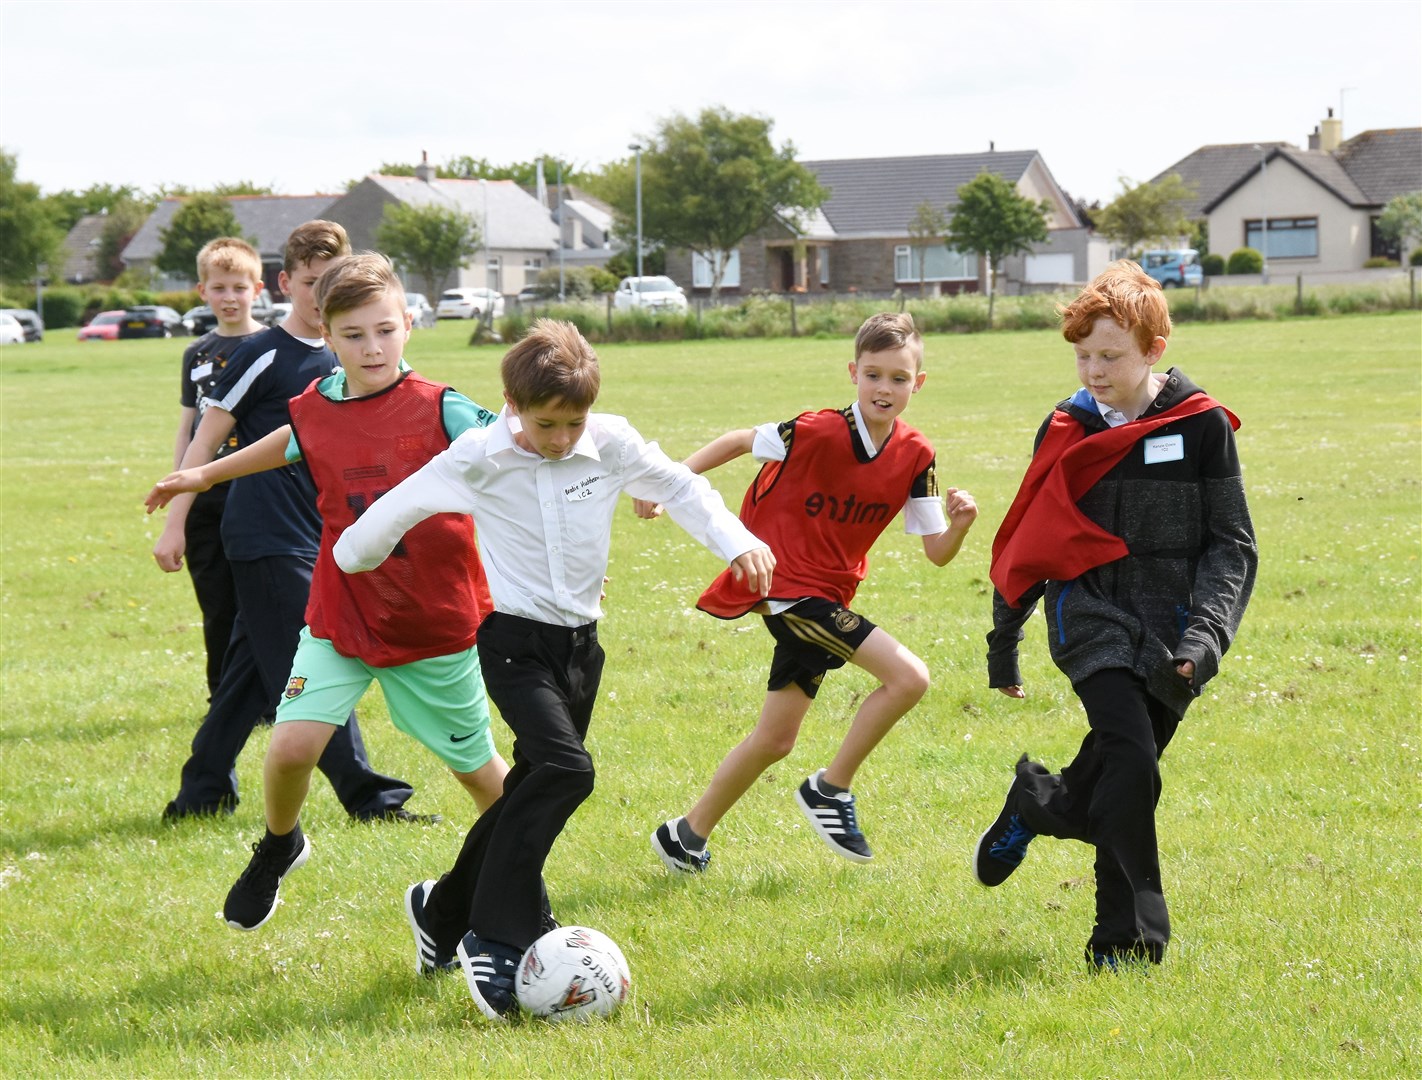 The awards will celebrate the champions of grassroots football.